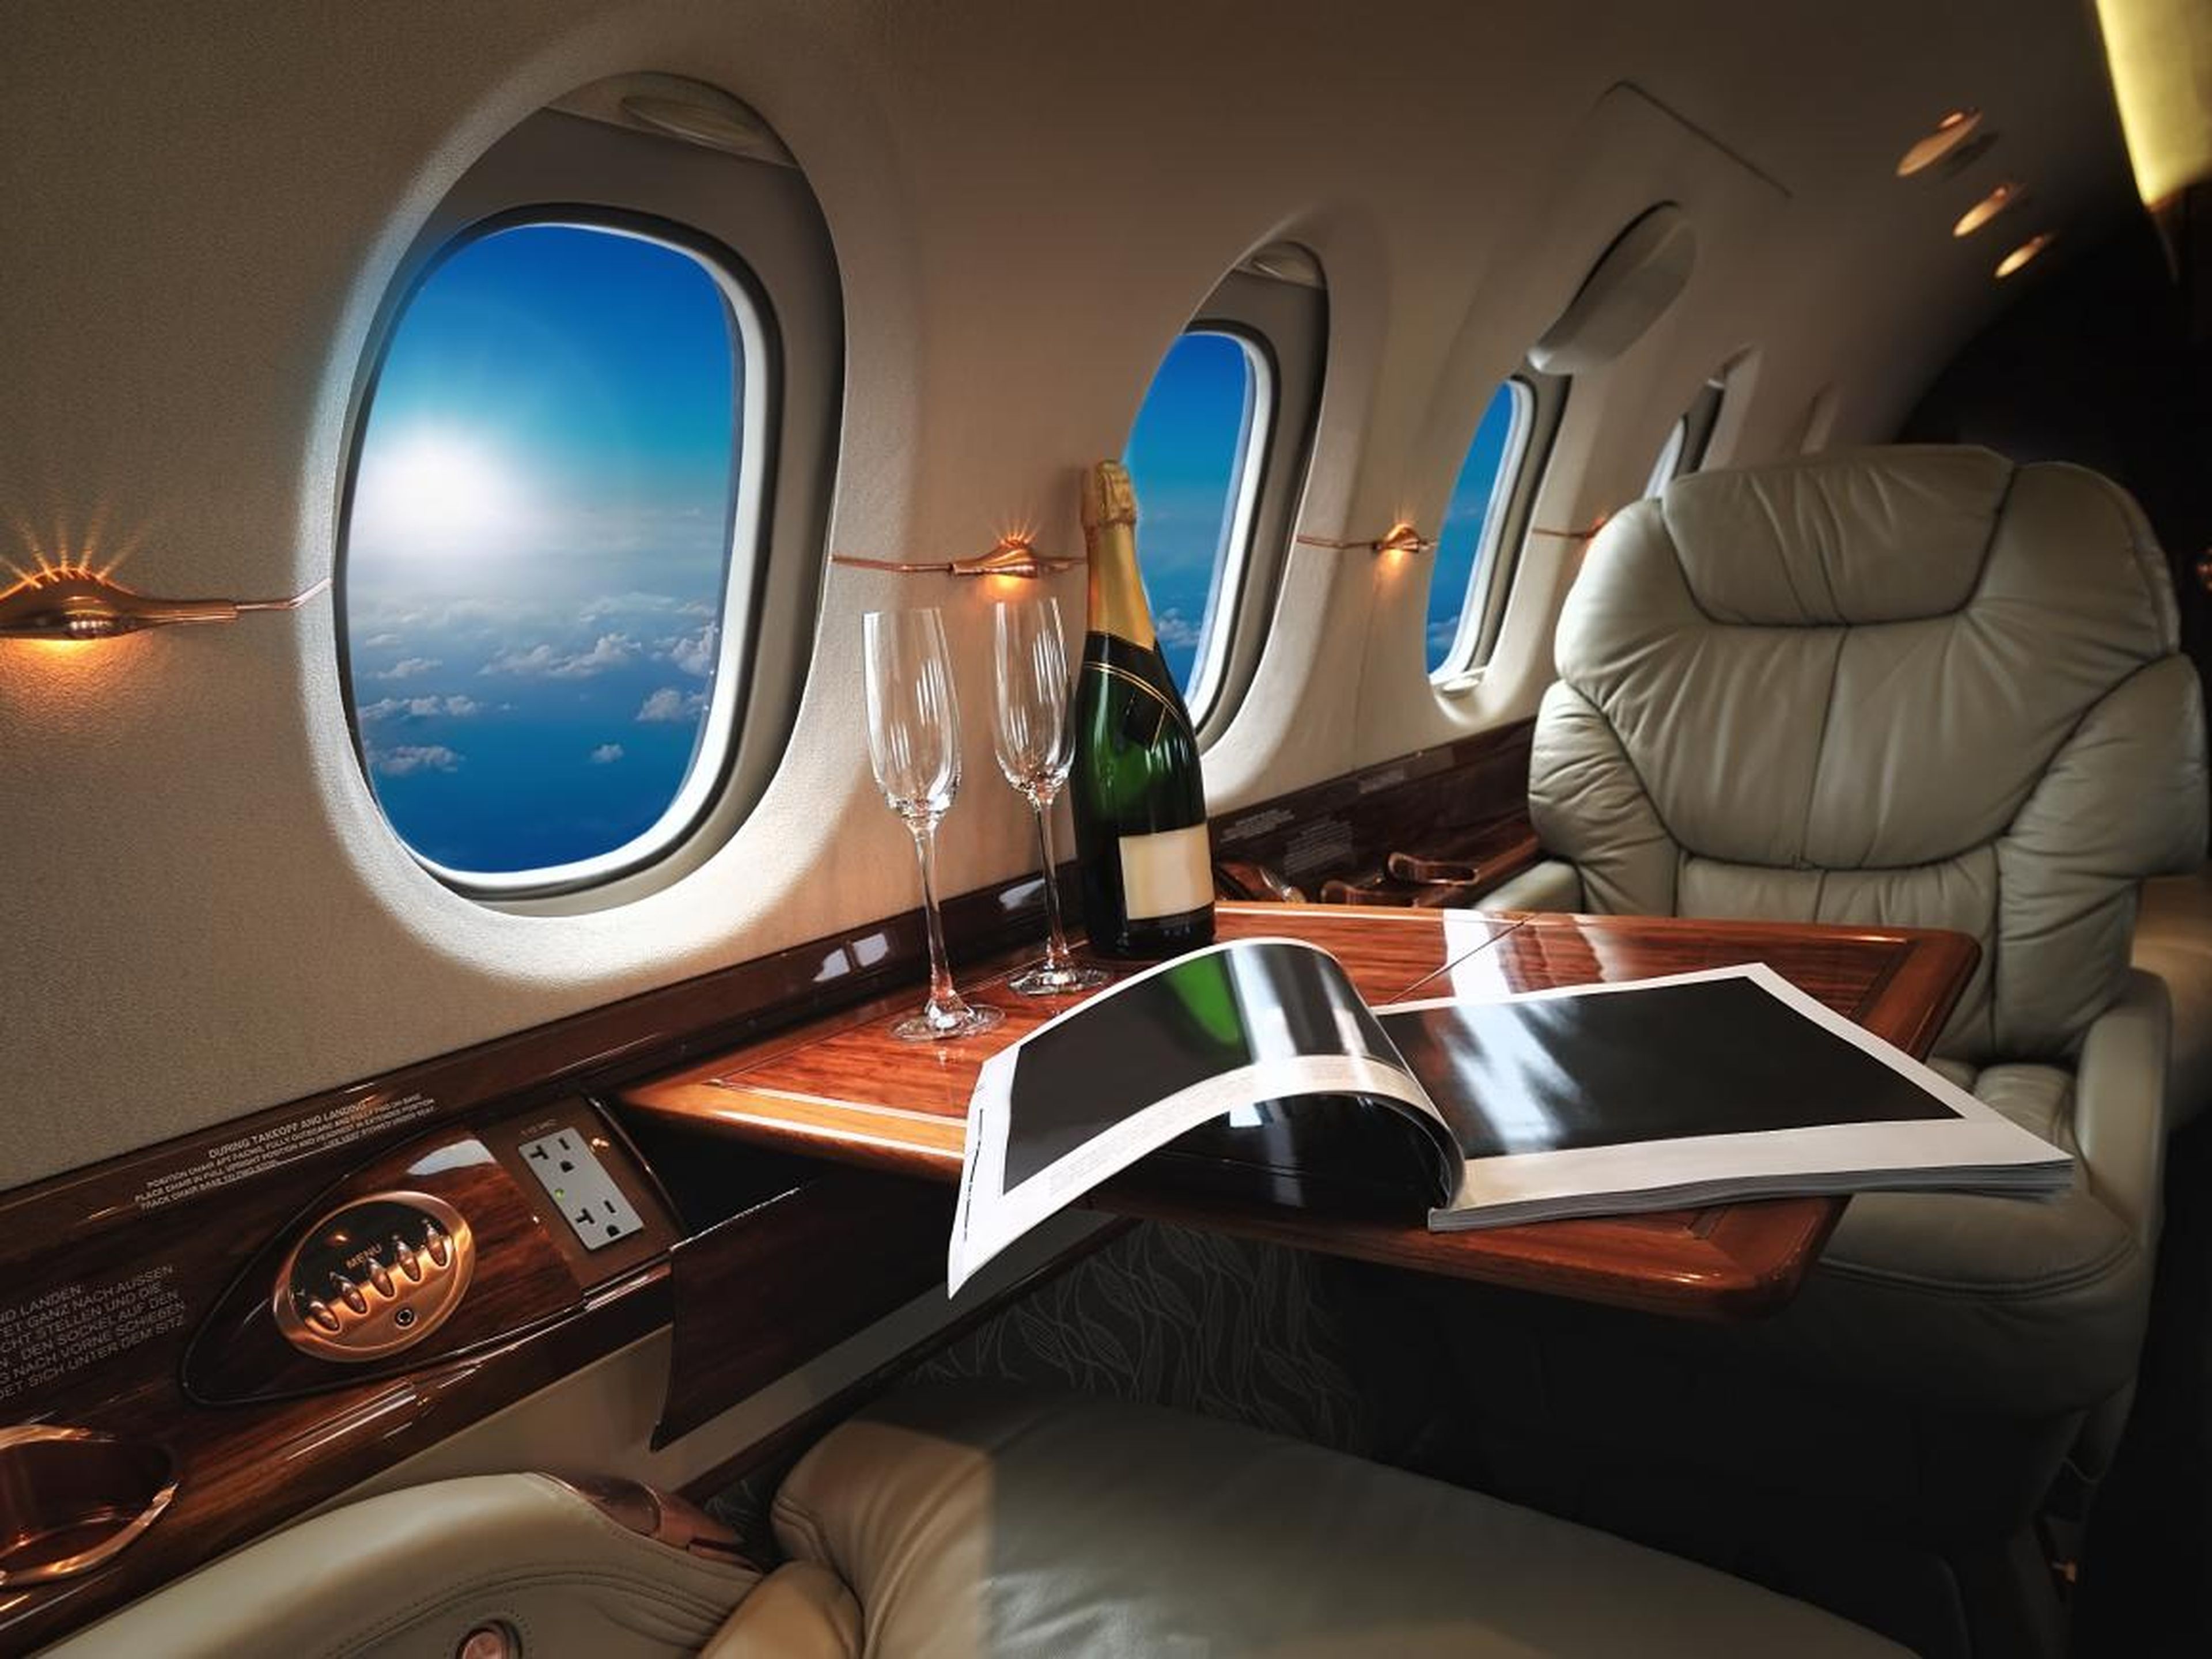 Flying on a private jet is a completely different experience than flying commercial, Eric Roth, president of International Jet Interiors, a company that designs interiors of private jets, told Business Insider.